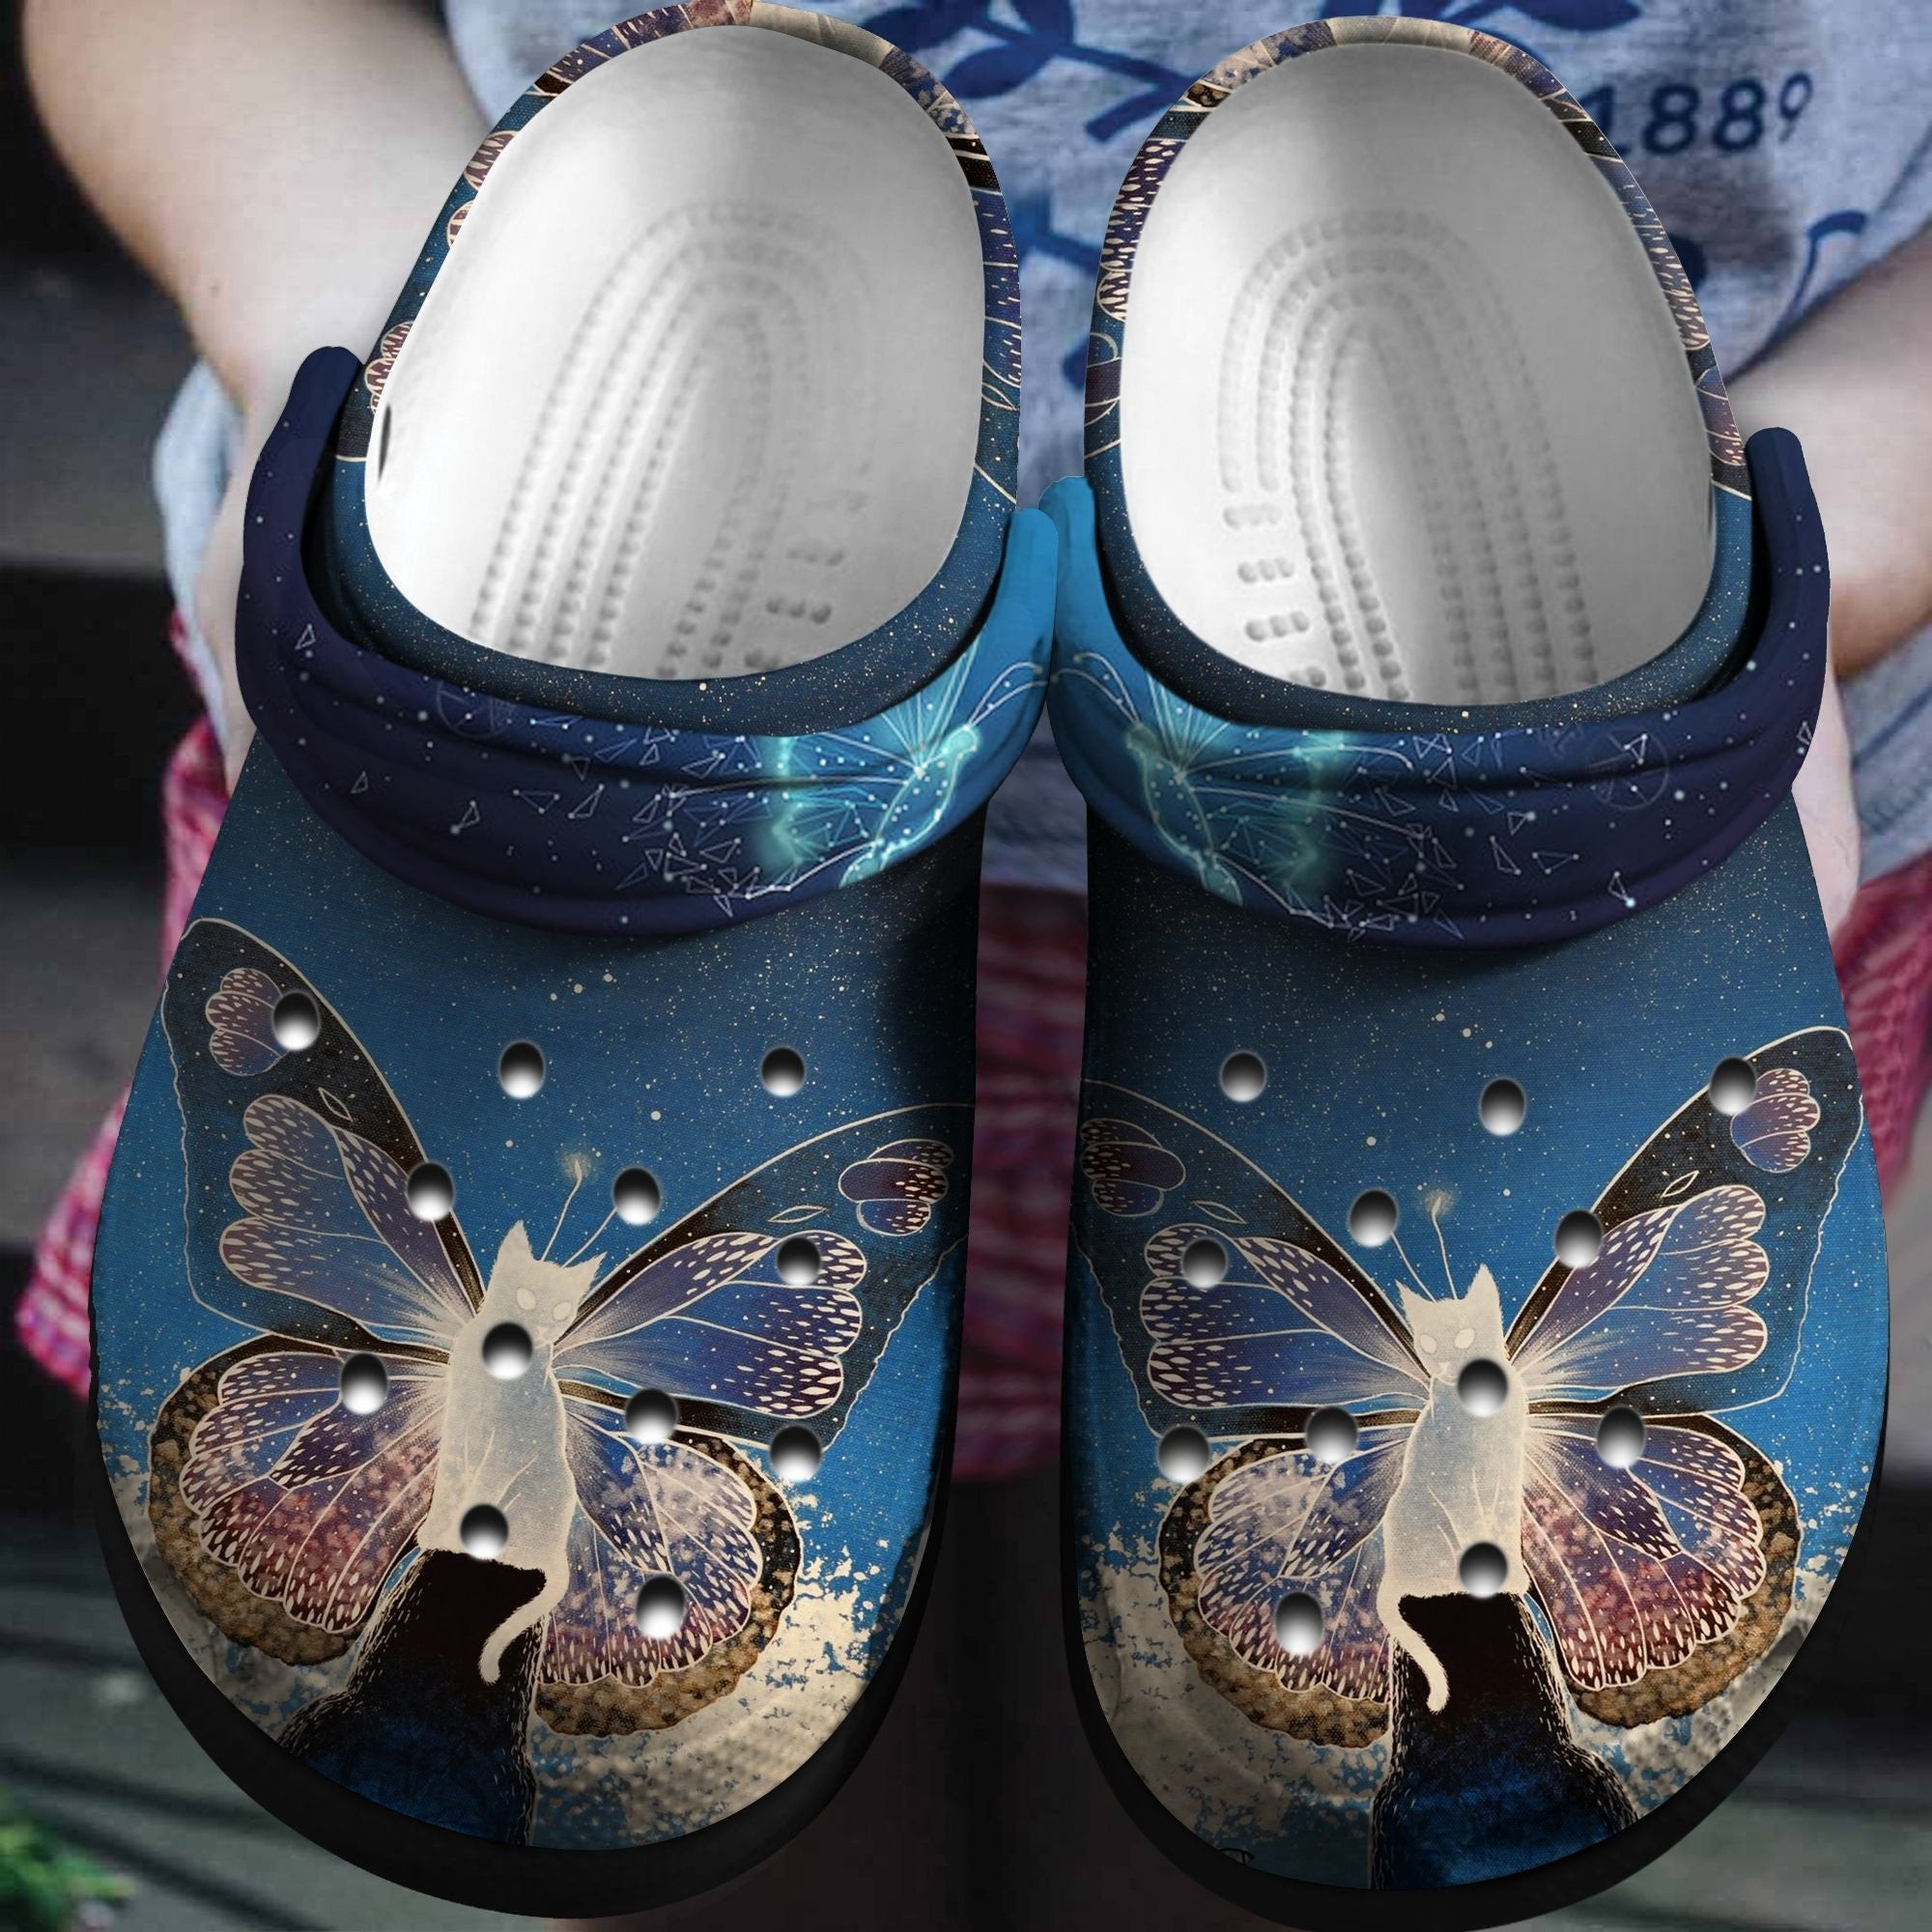 Miracle Butterfly Cat Shoes - Magical Animal Crocs Clogs Gift For Girlfriend